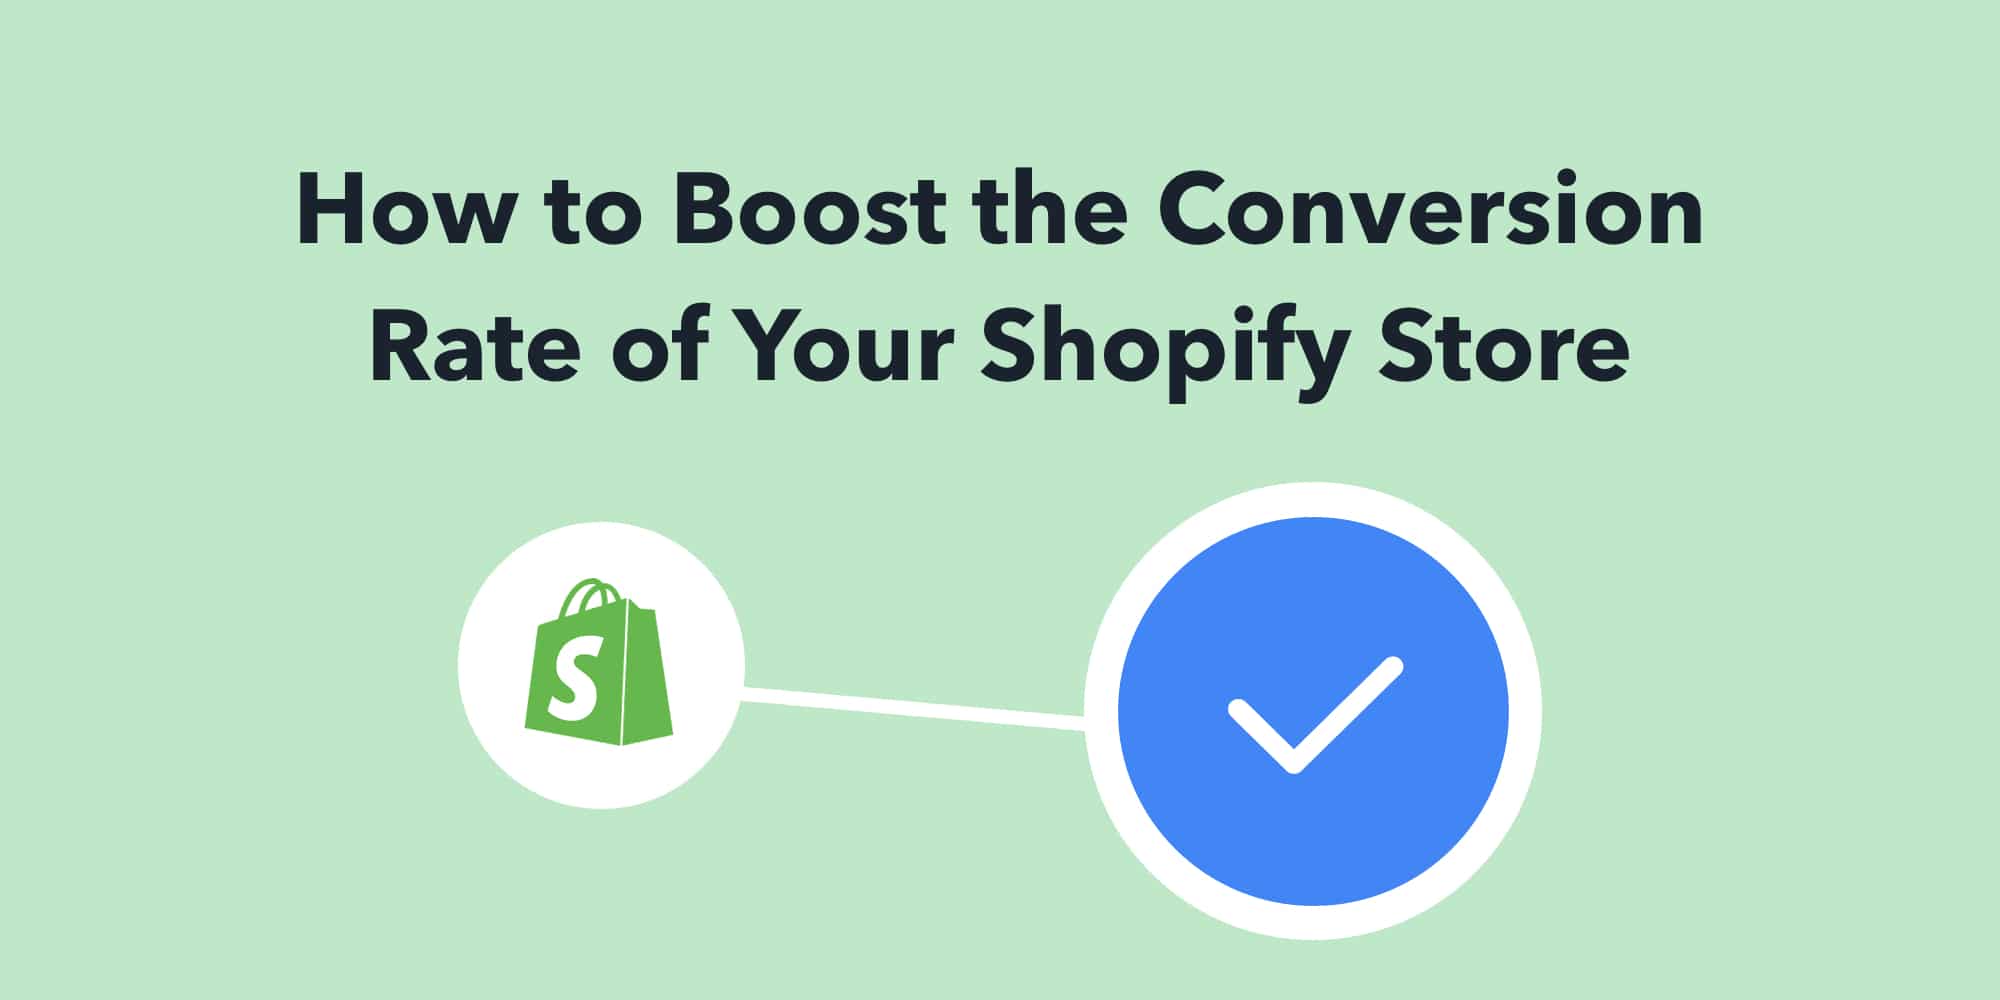 How to Boost the Conversion Rate of Your Shopify Store